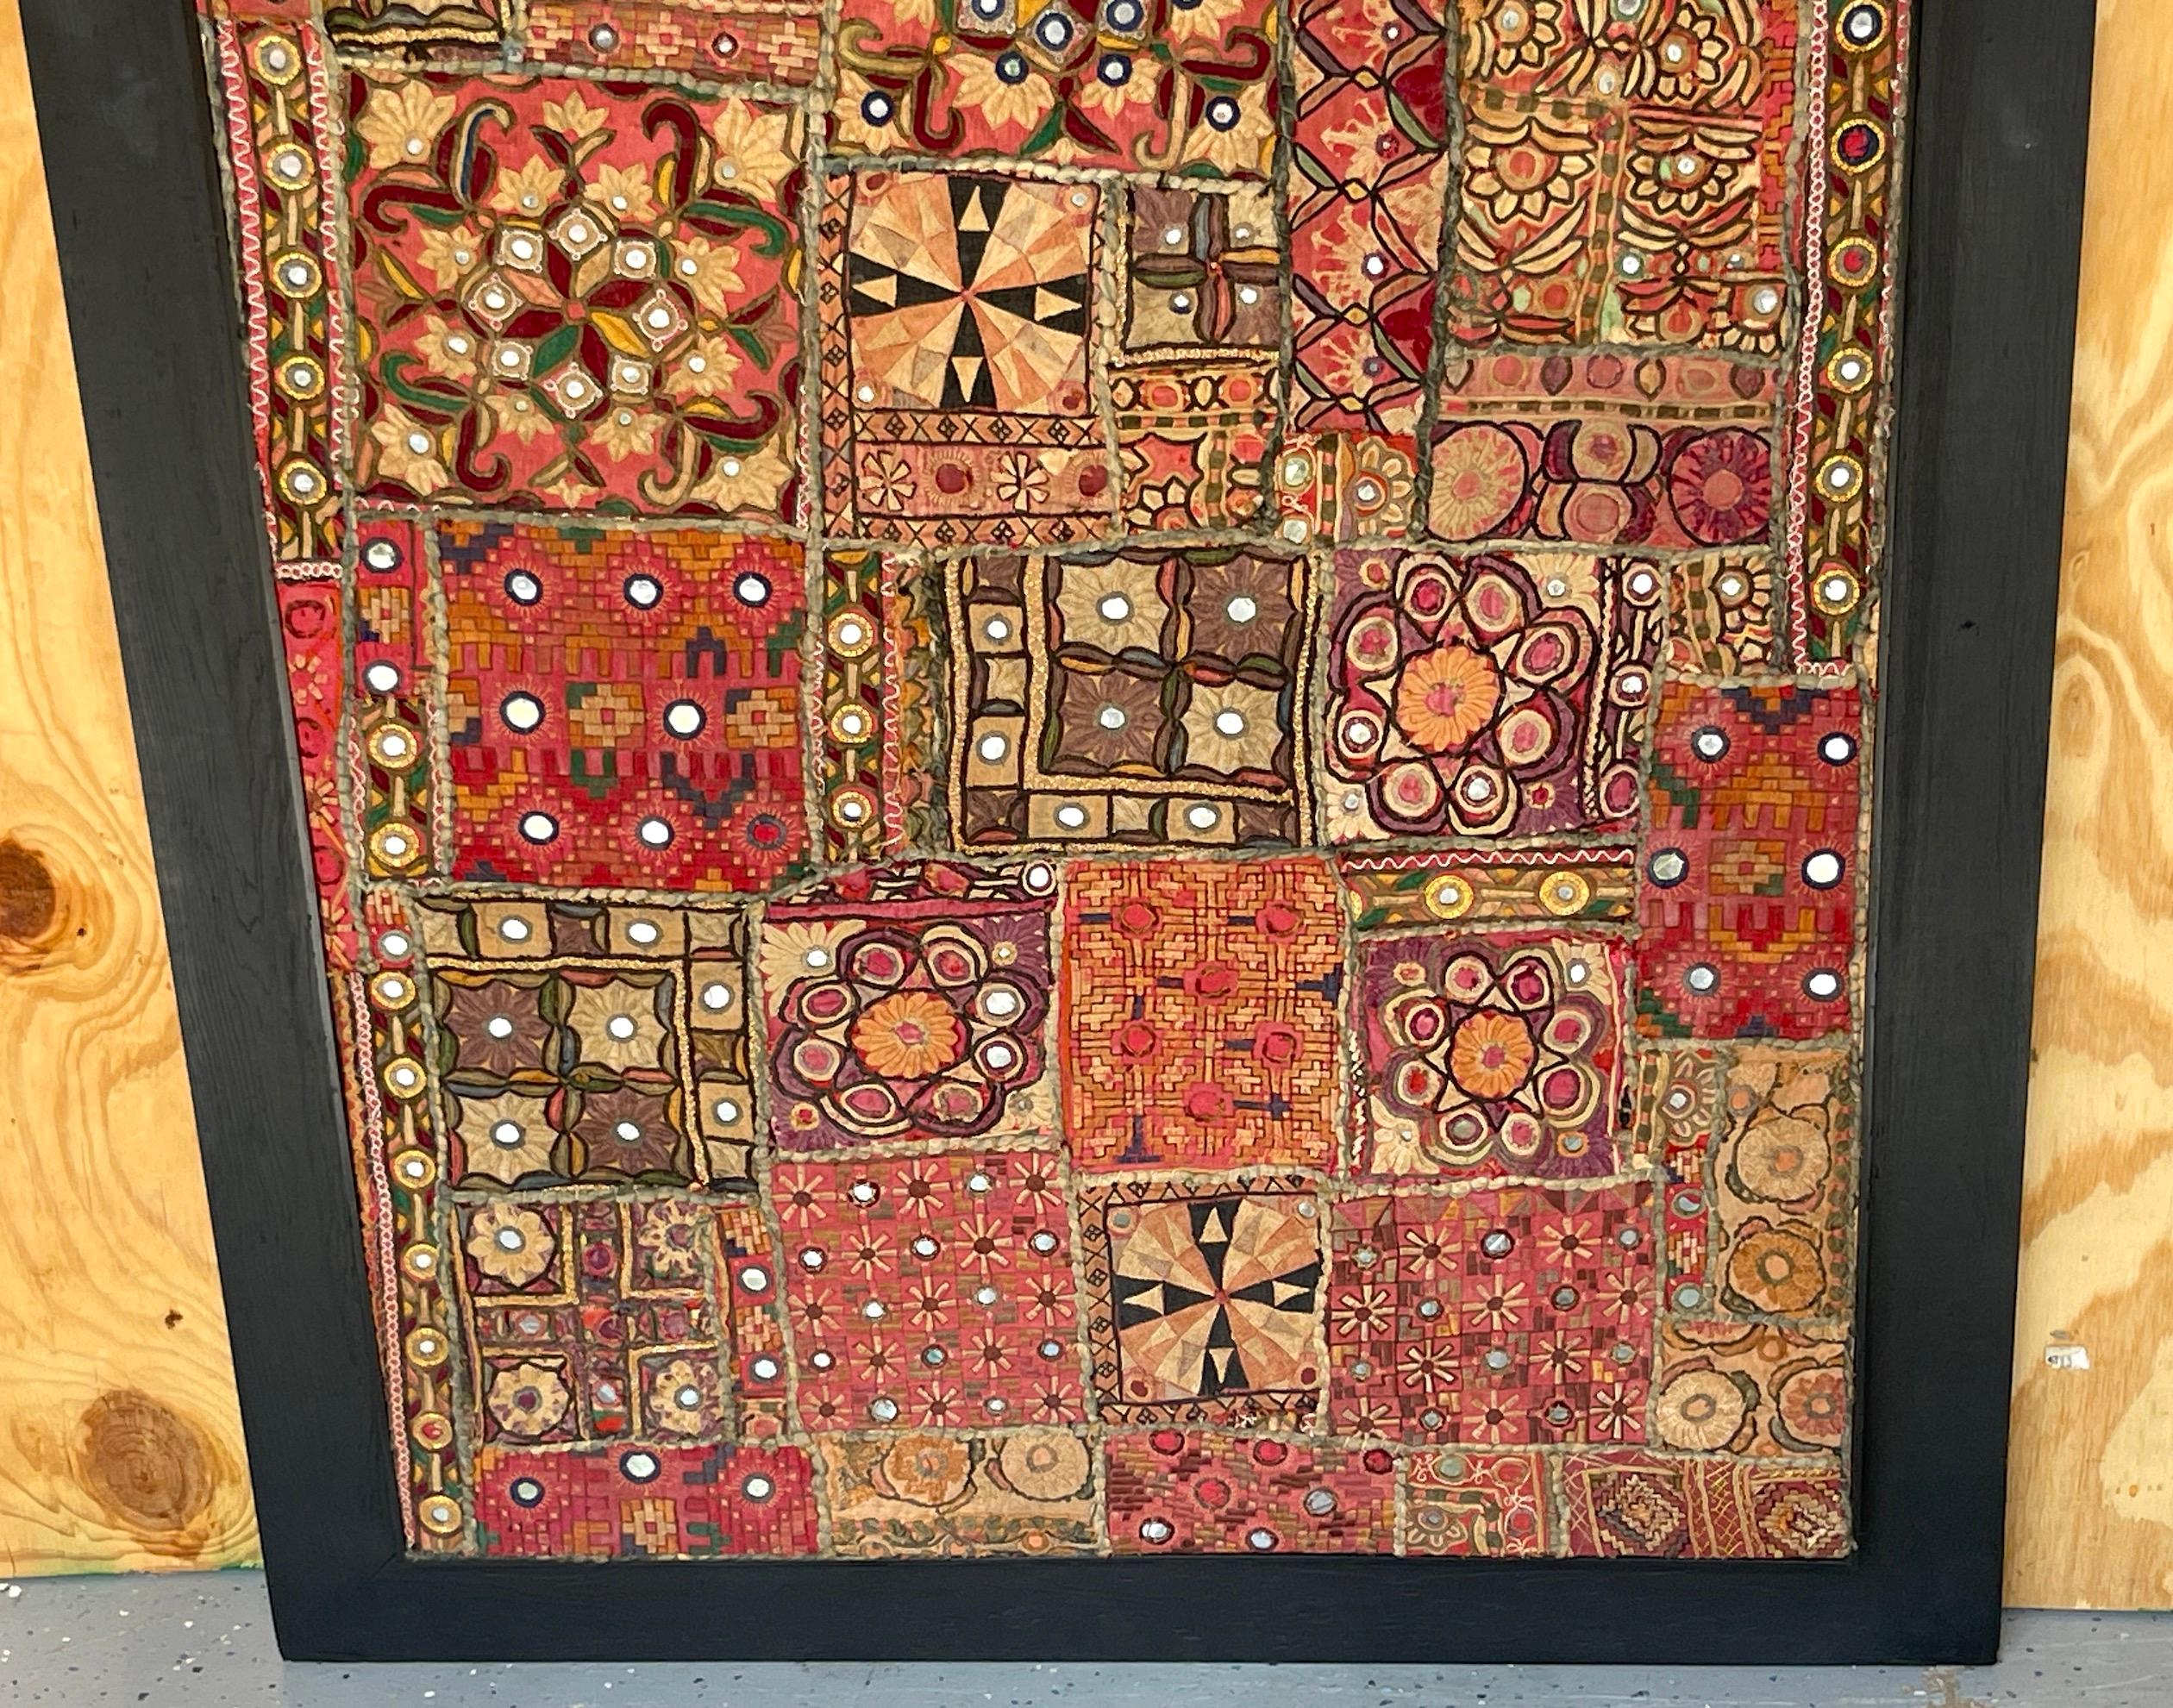 Fabric Vintage Indian Framed Embroidery/ Shisha Mosaic Tapestry by Shahzada For Sale